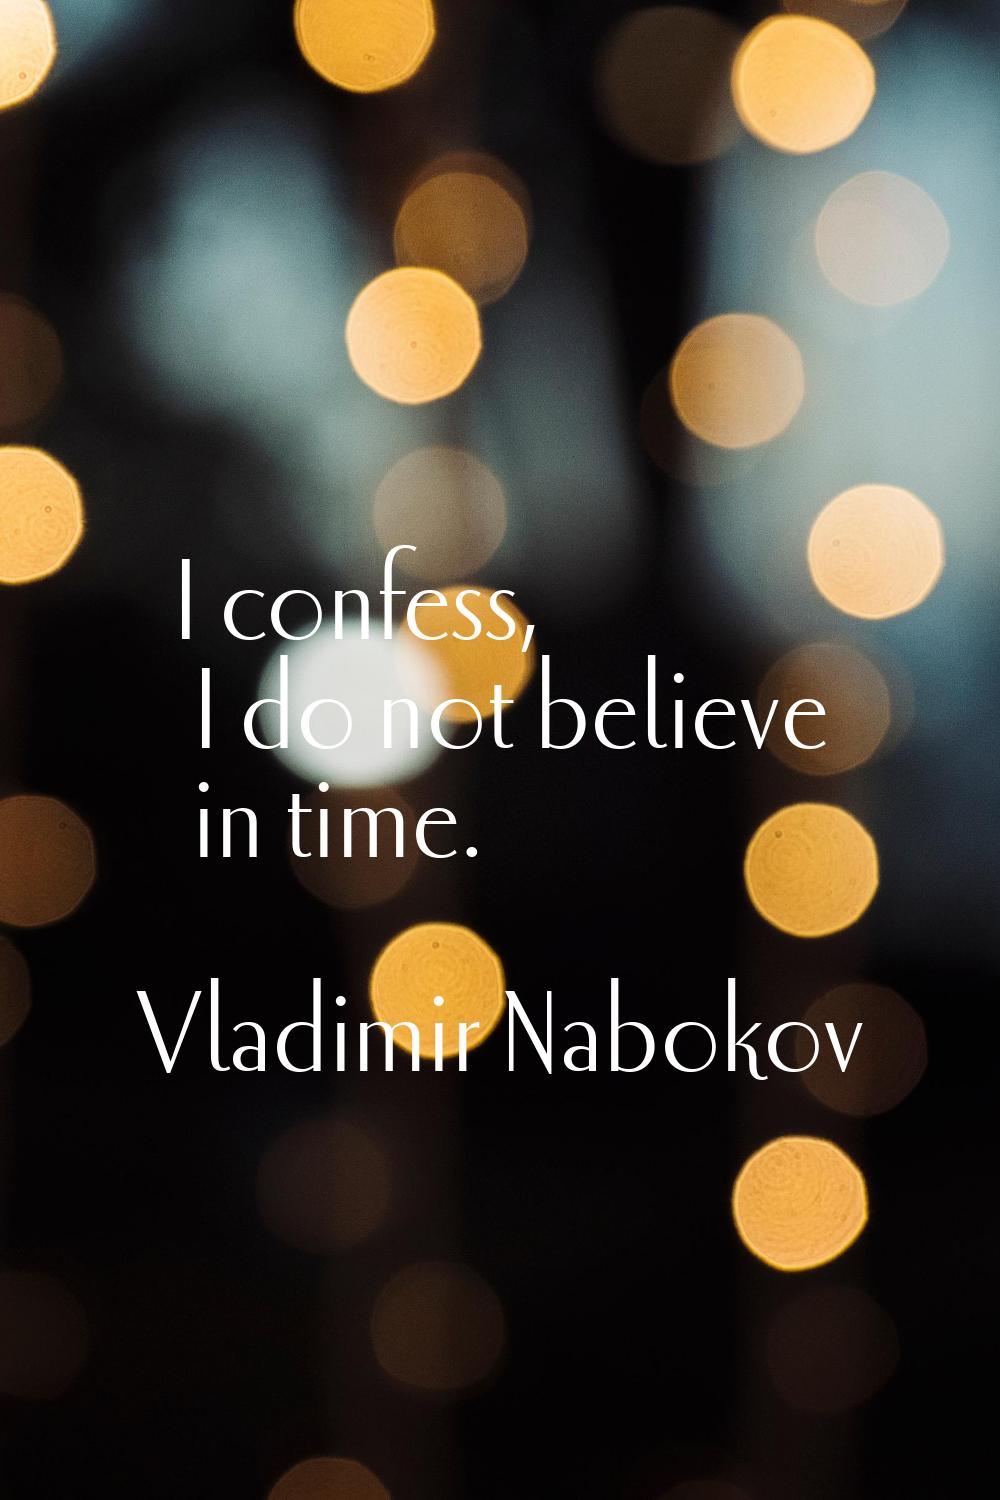 I confess, I do not believe in time.